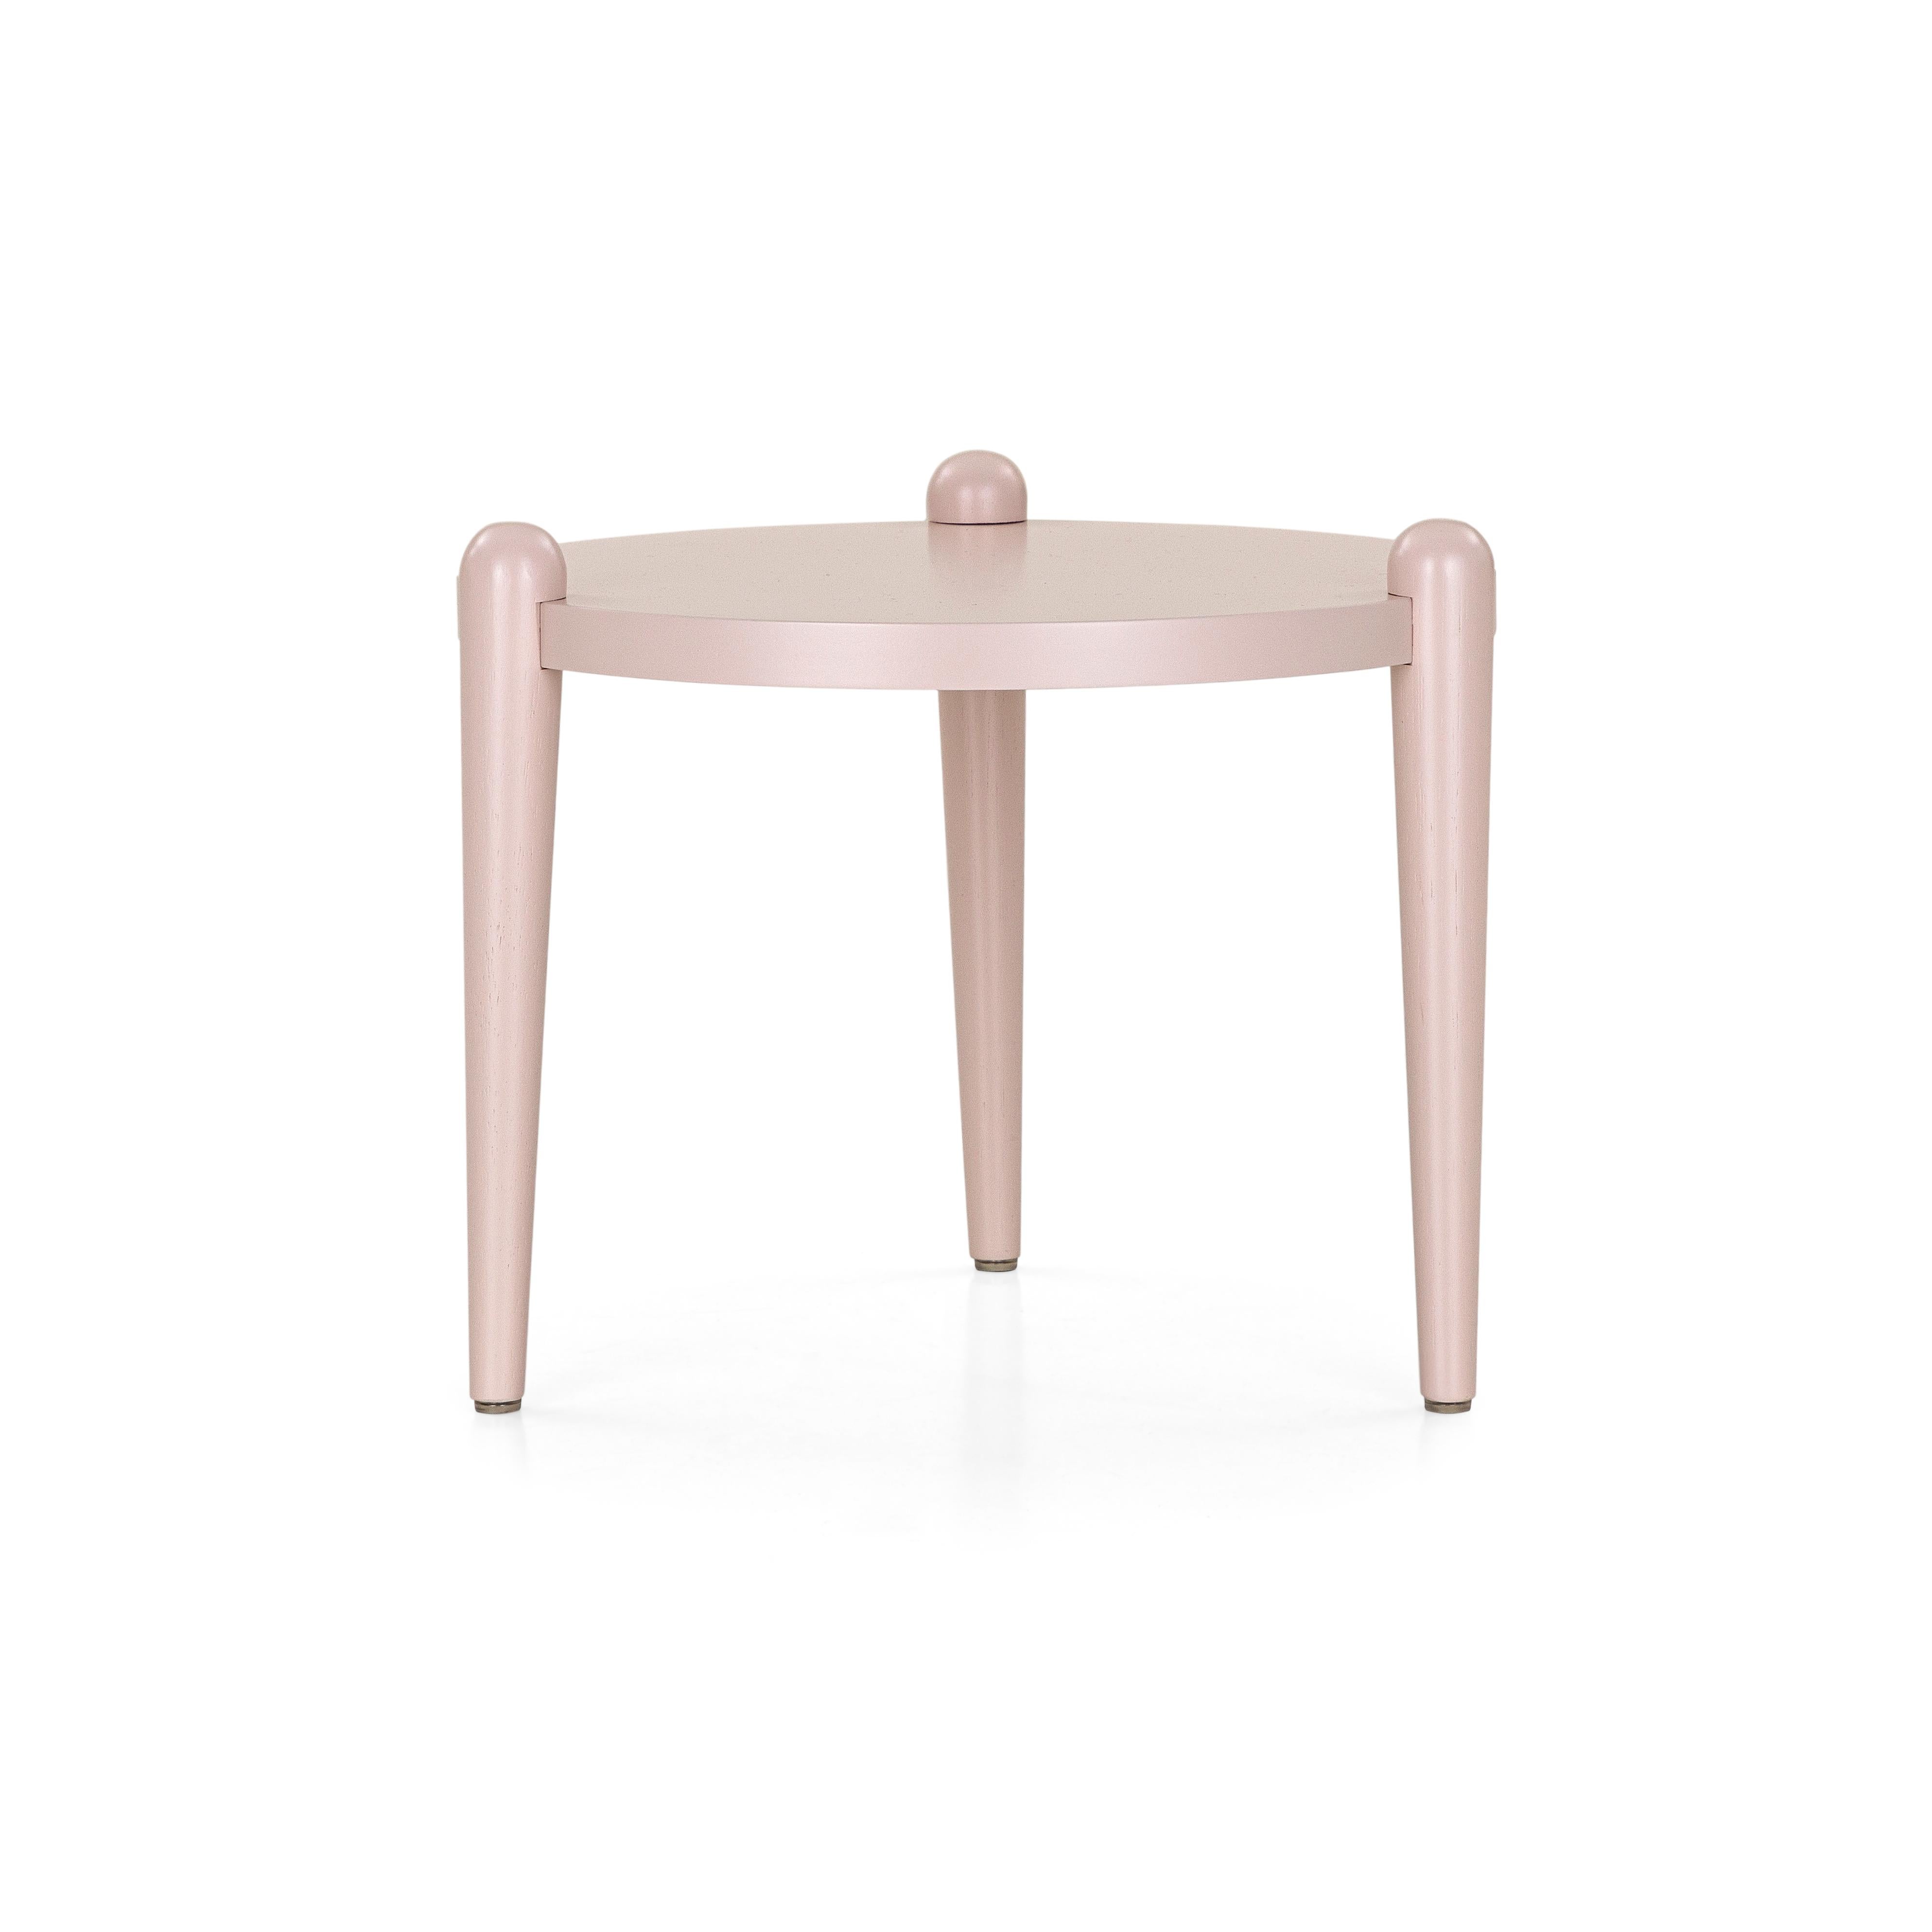 Pan Contemporary Side Tables in Light Pink Quartz Finish, Set of 3 For Sale 5